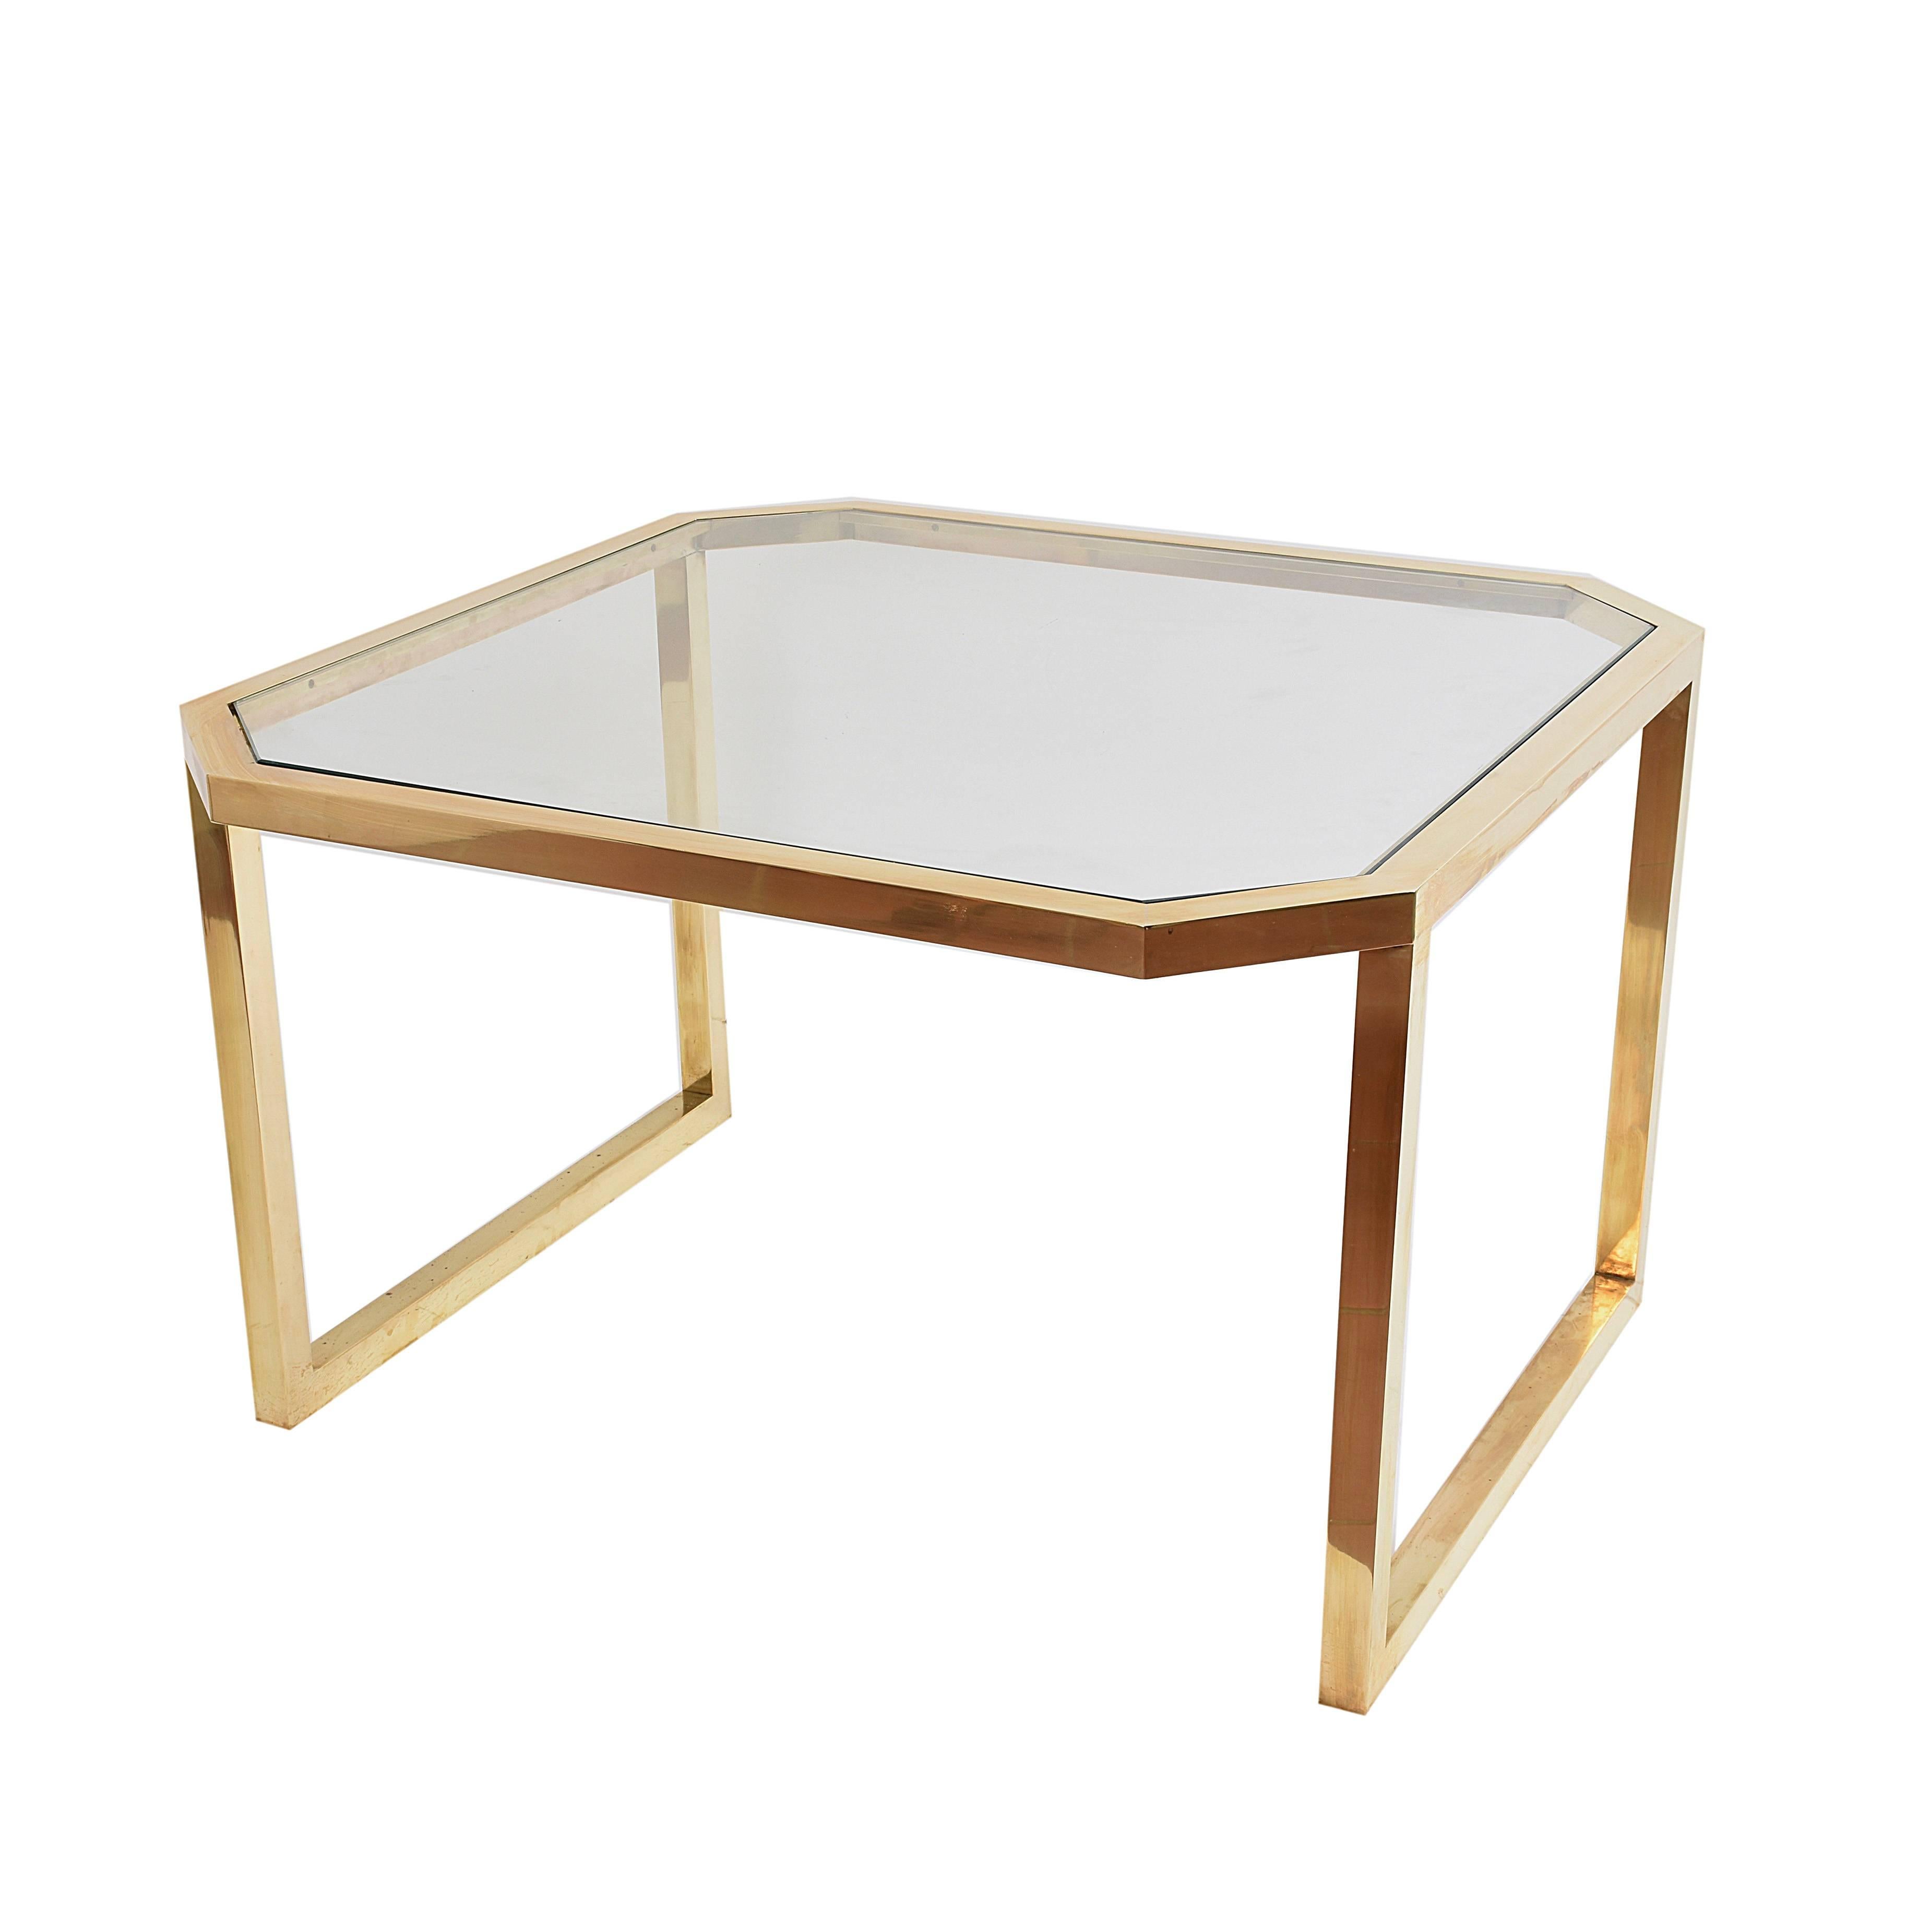 20th Century Octagonal Brass Table and Glass Top, Italy, 1970s, Mid-Century Modern